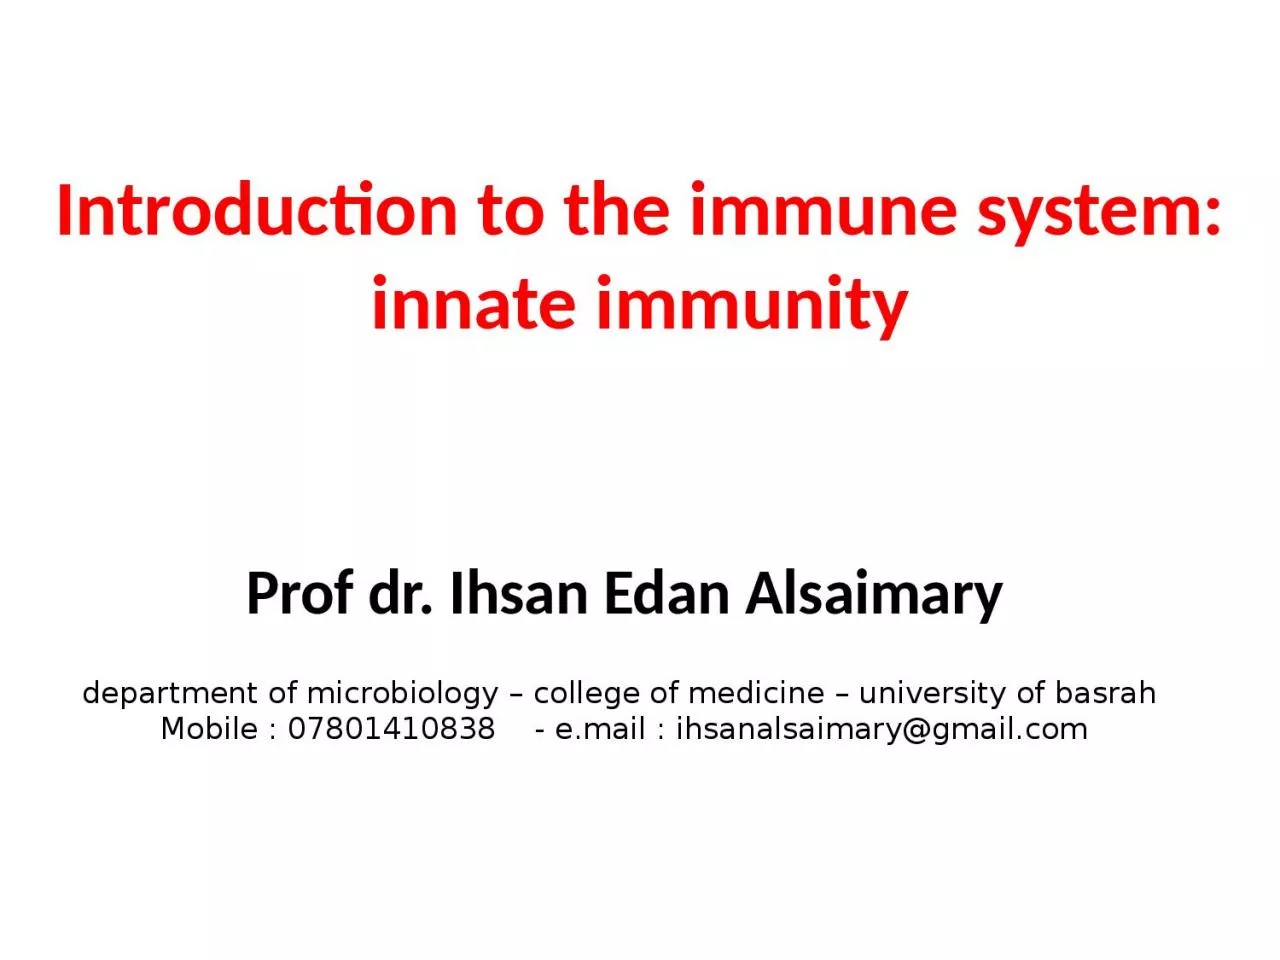 Introduction to the immune system: